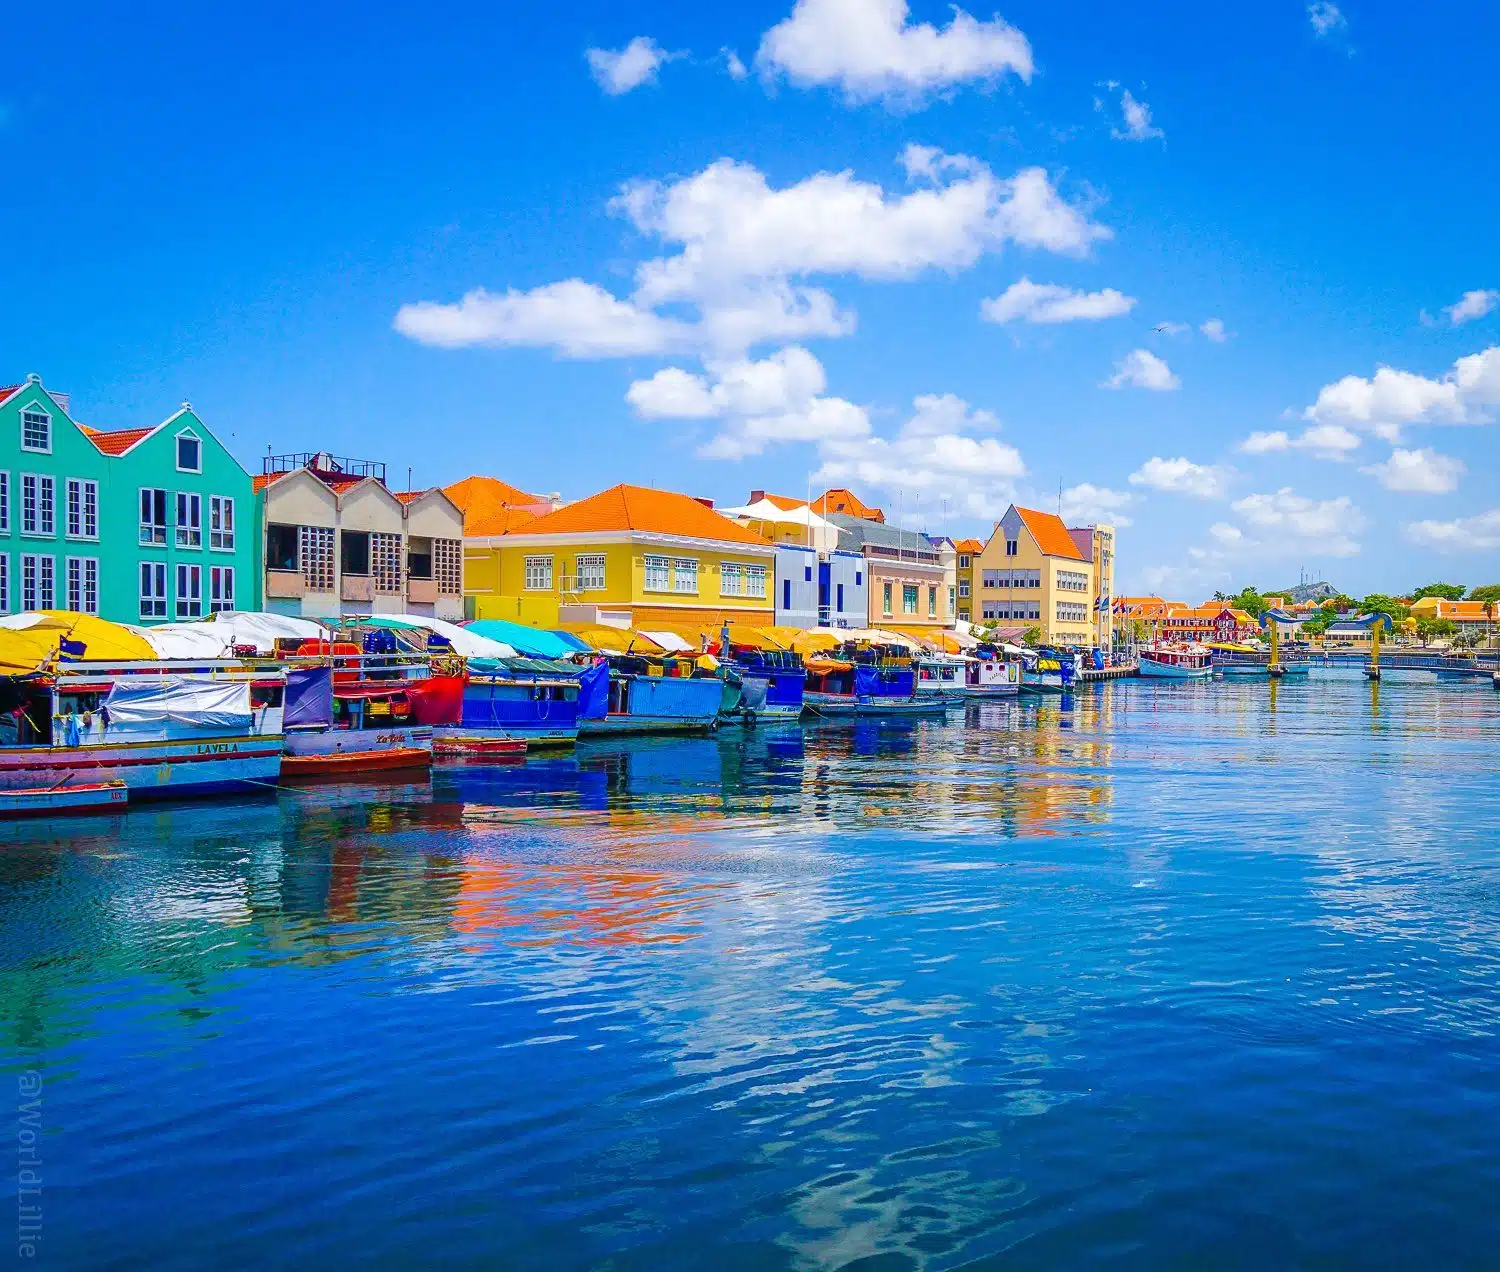 Willemstad, Curacao: Fishermen's boats reflect the water.